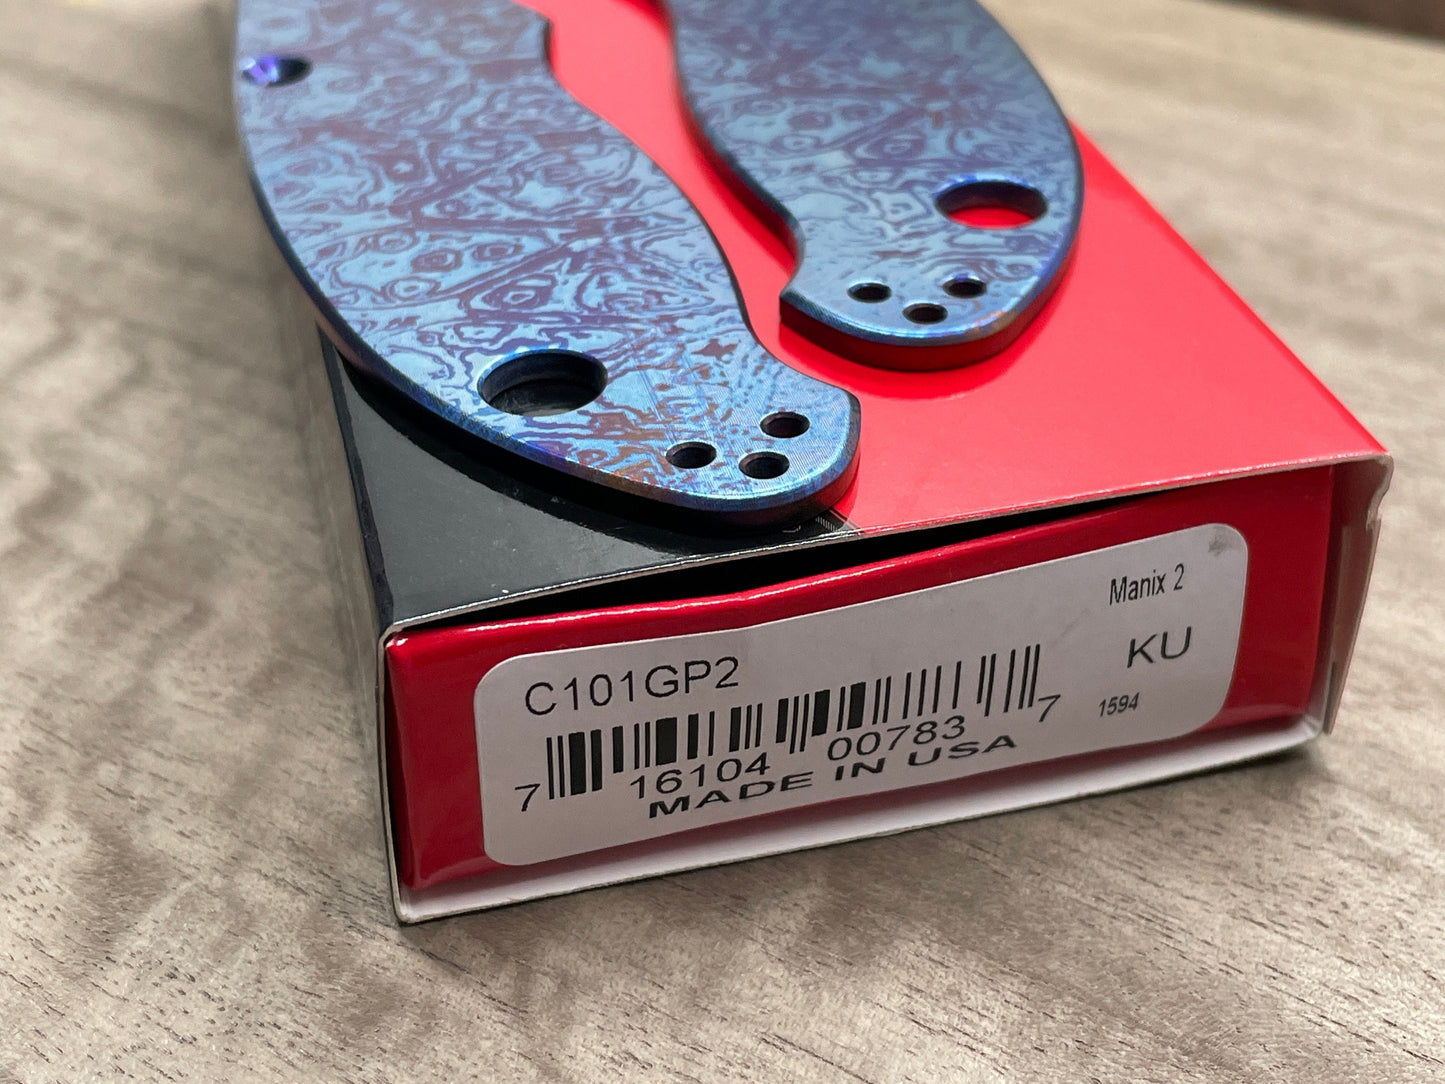 SUNRISE engraved Flamed Titanium scales for Spyderco MANIX 2